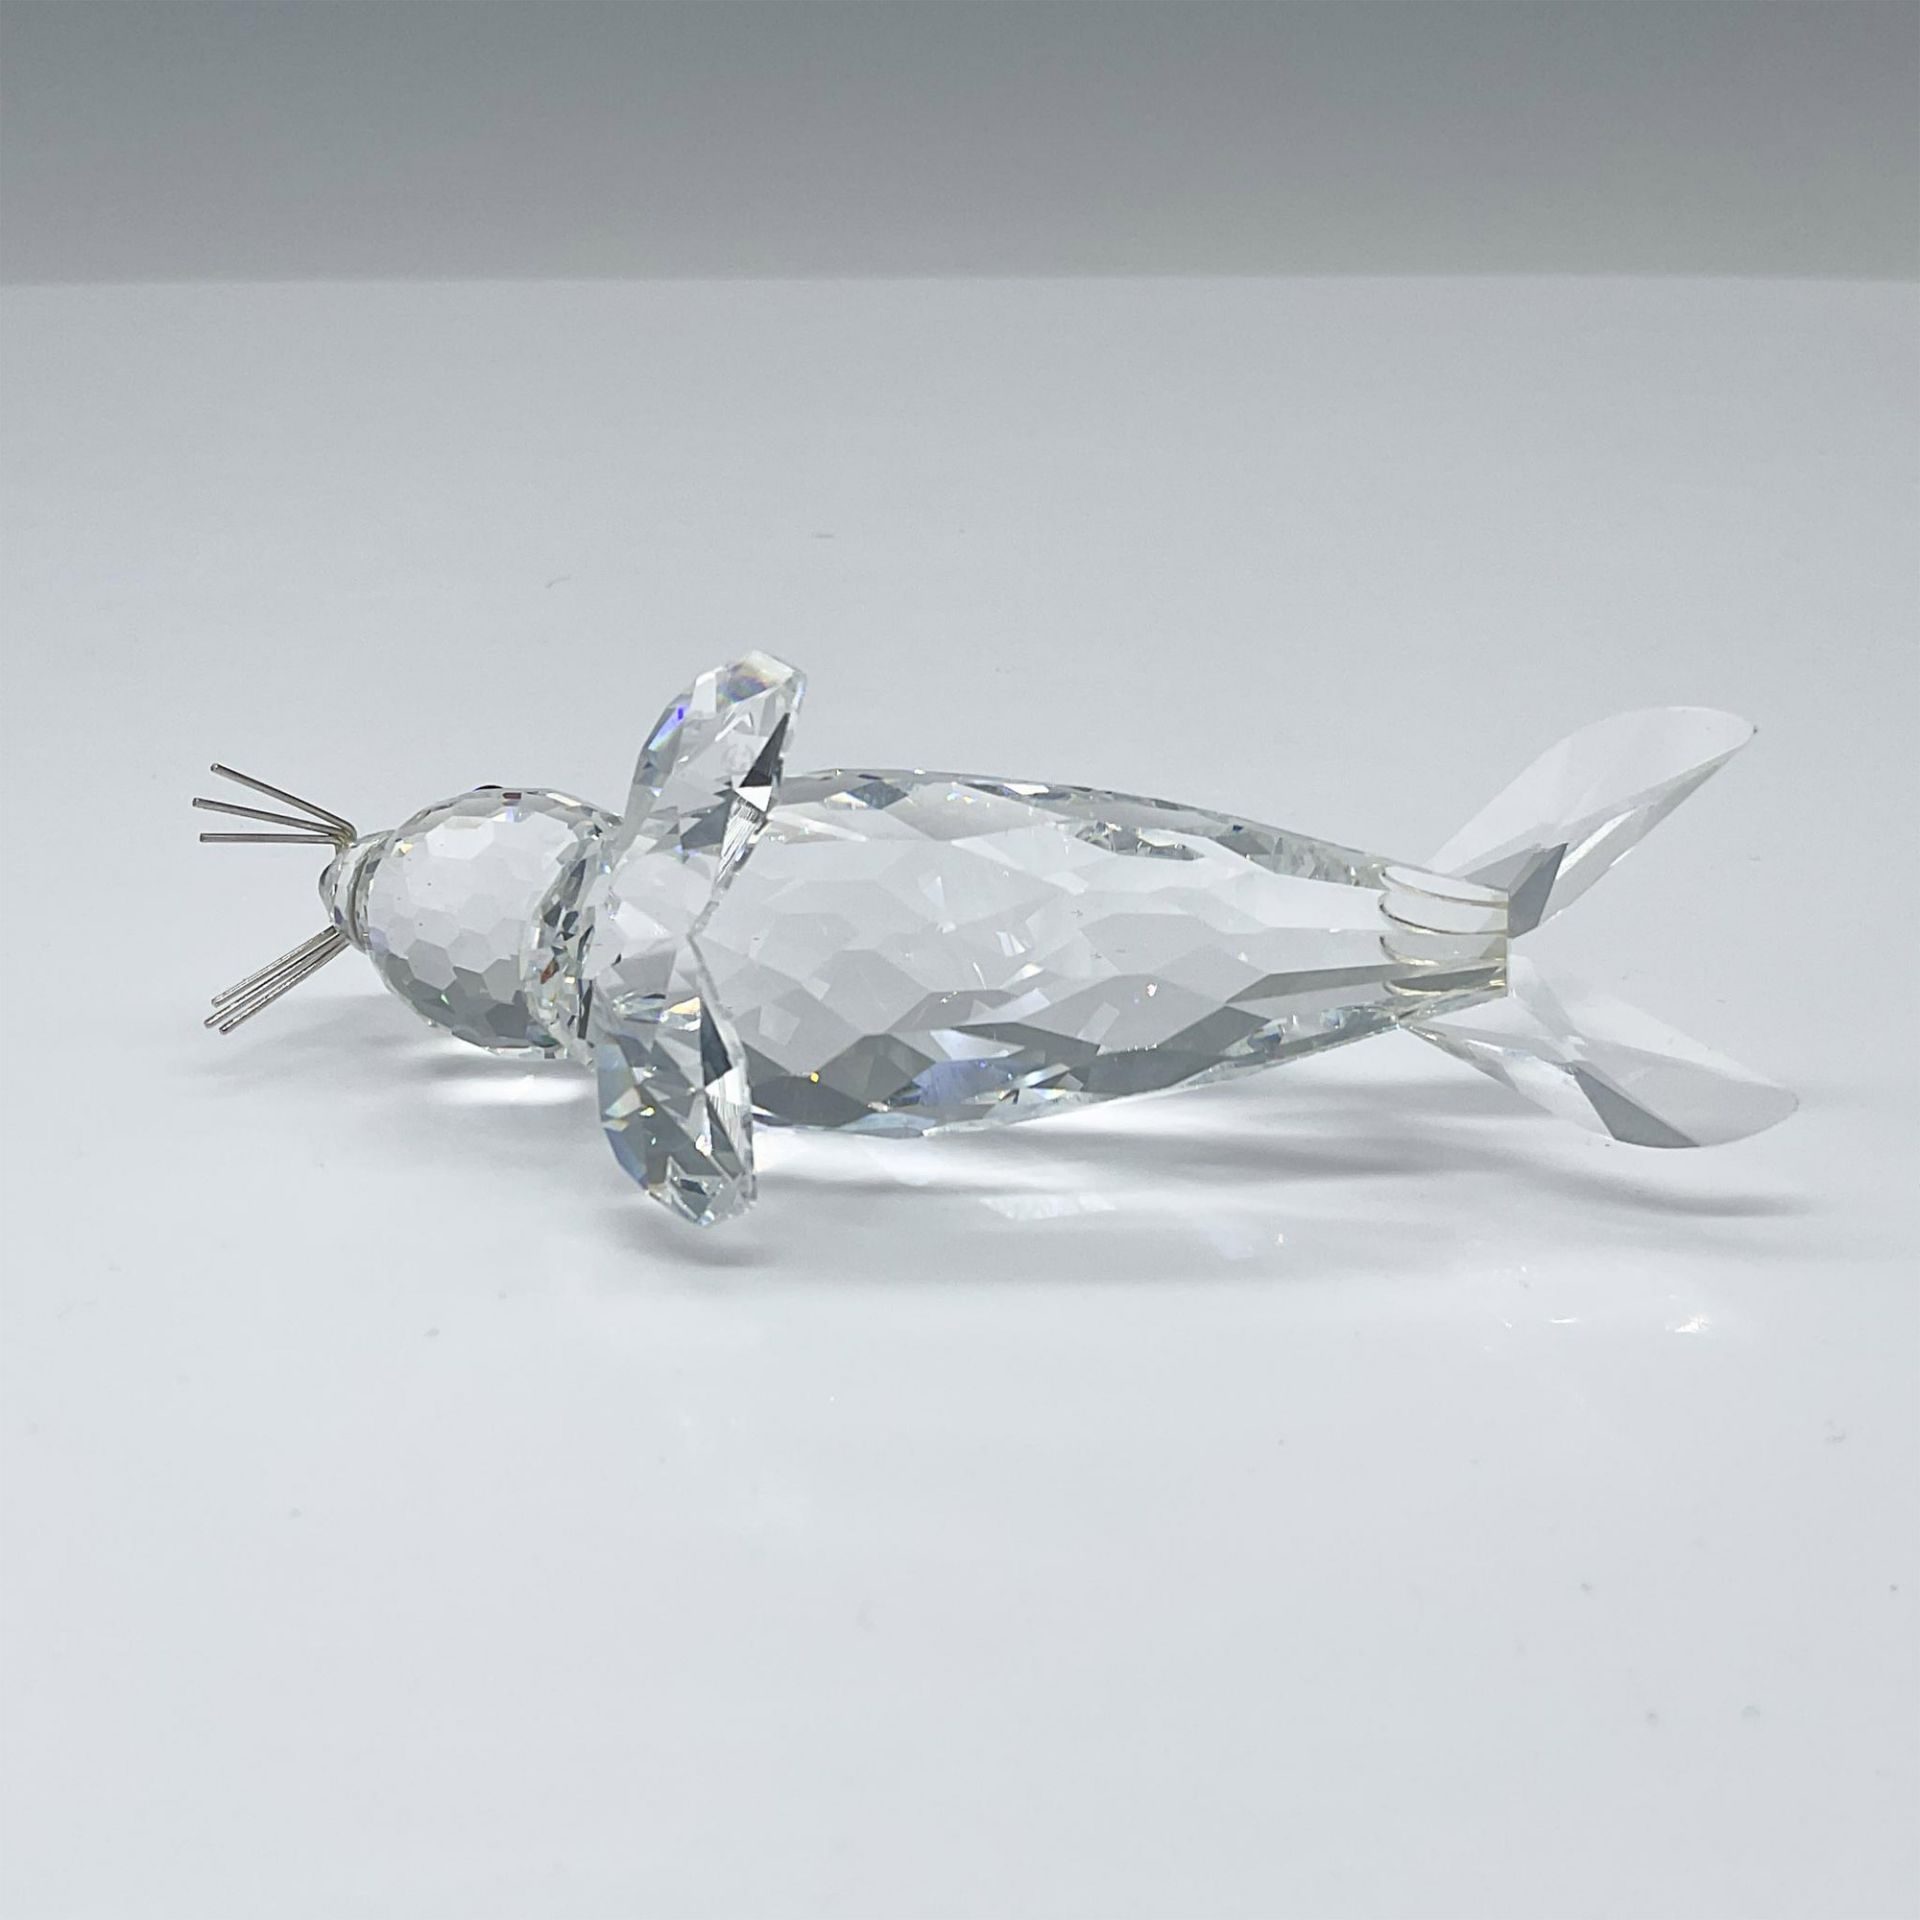 Swarovski Silver Crystal Figurine, Seal with Silver Whiskers - Image 3 of 4